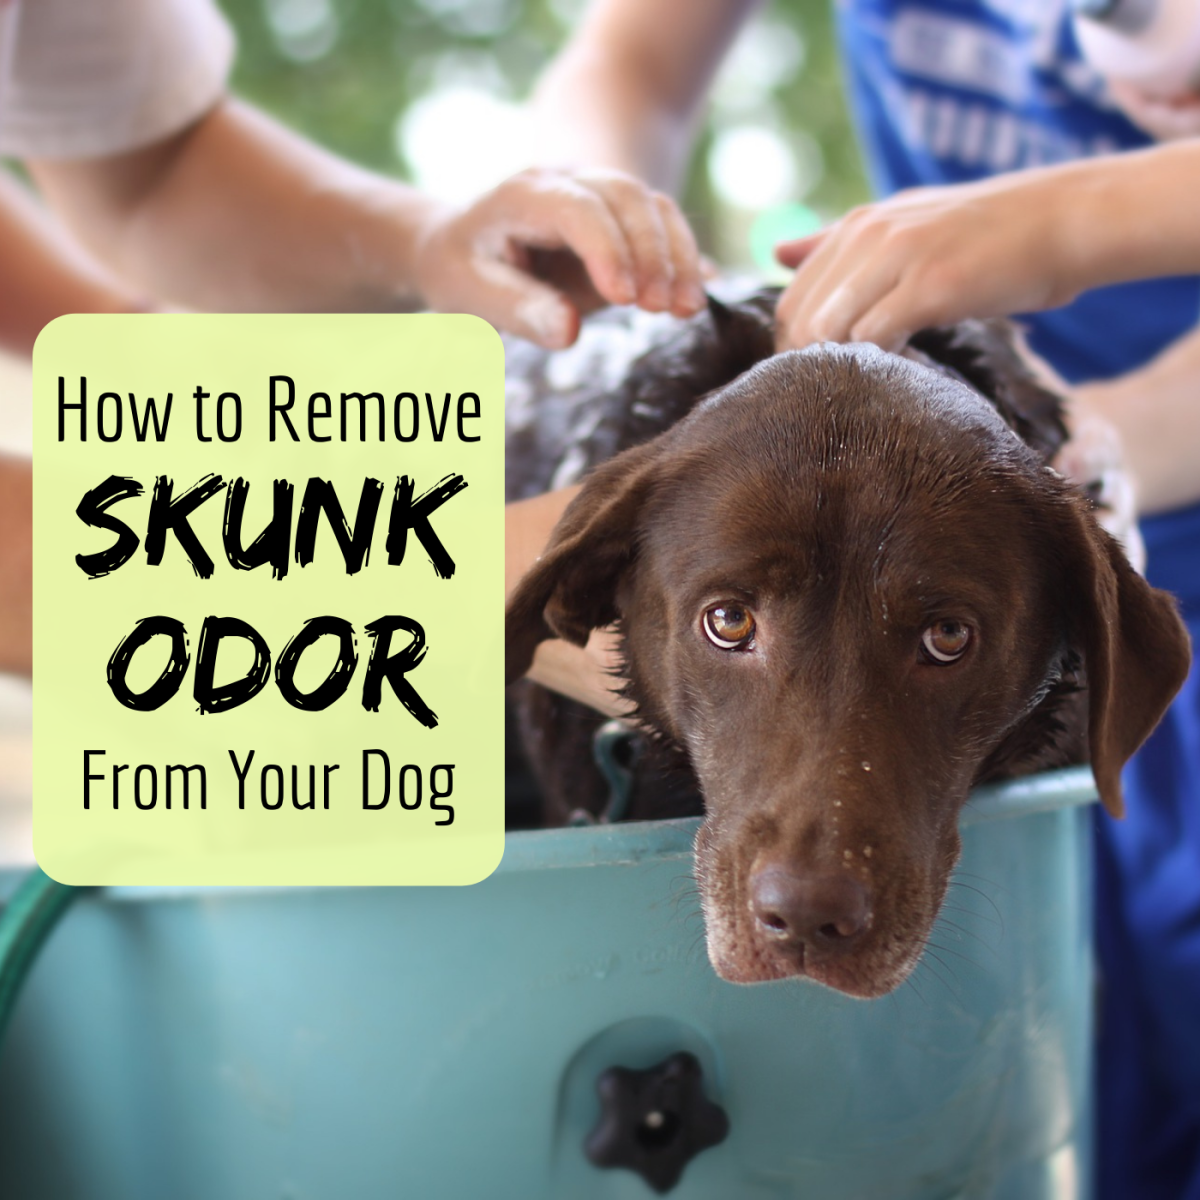 How to Remove the Skunk Odor From a Dog